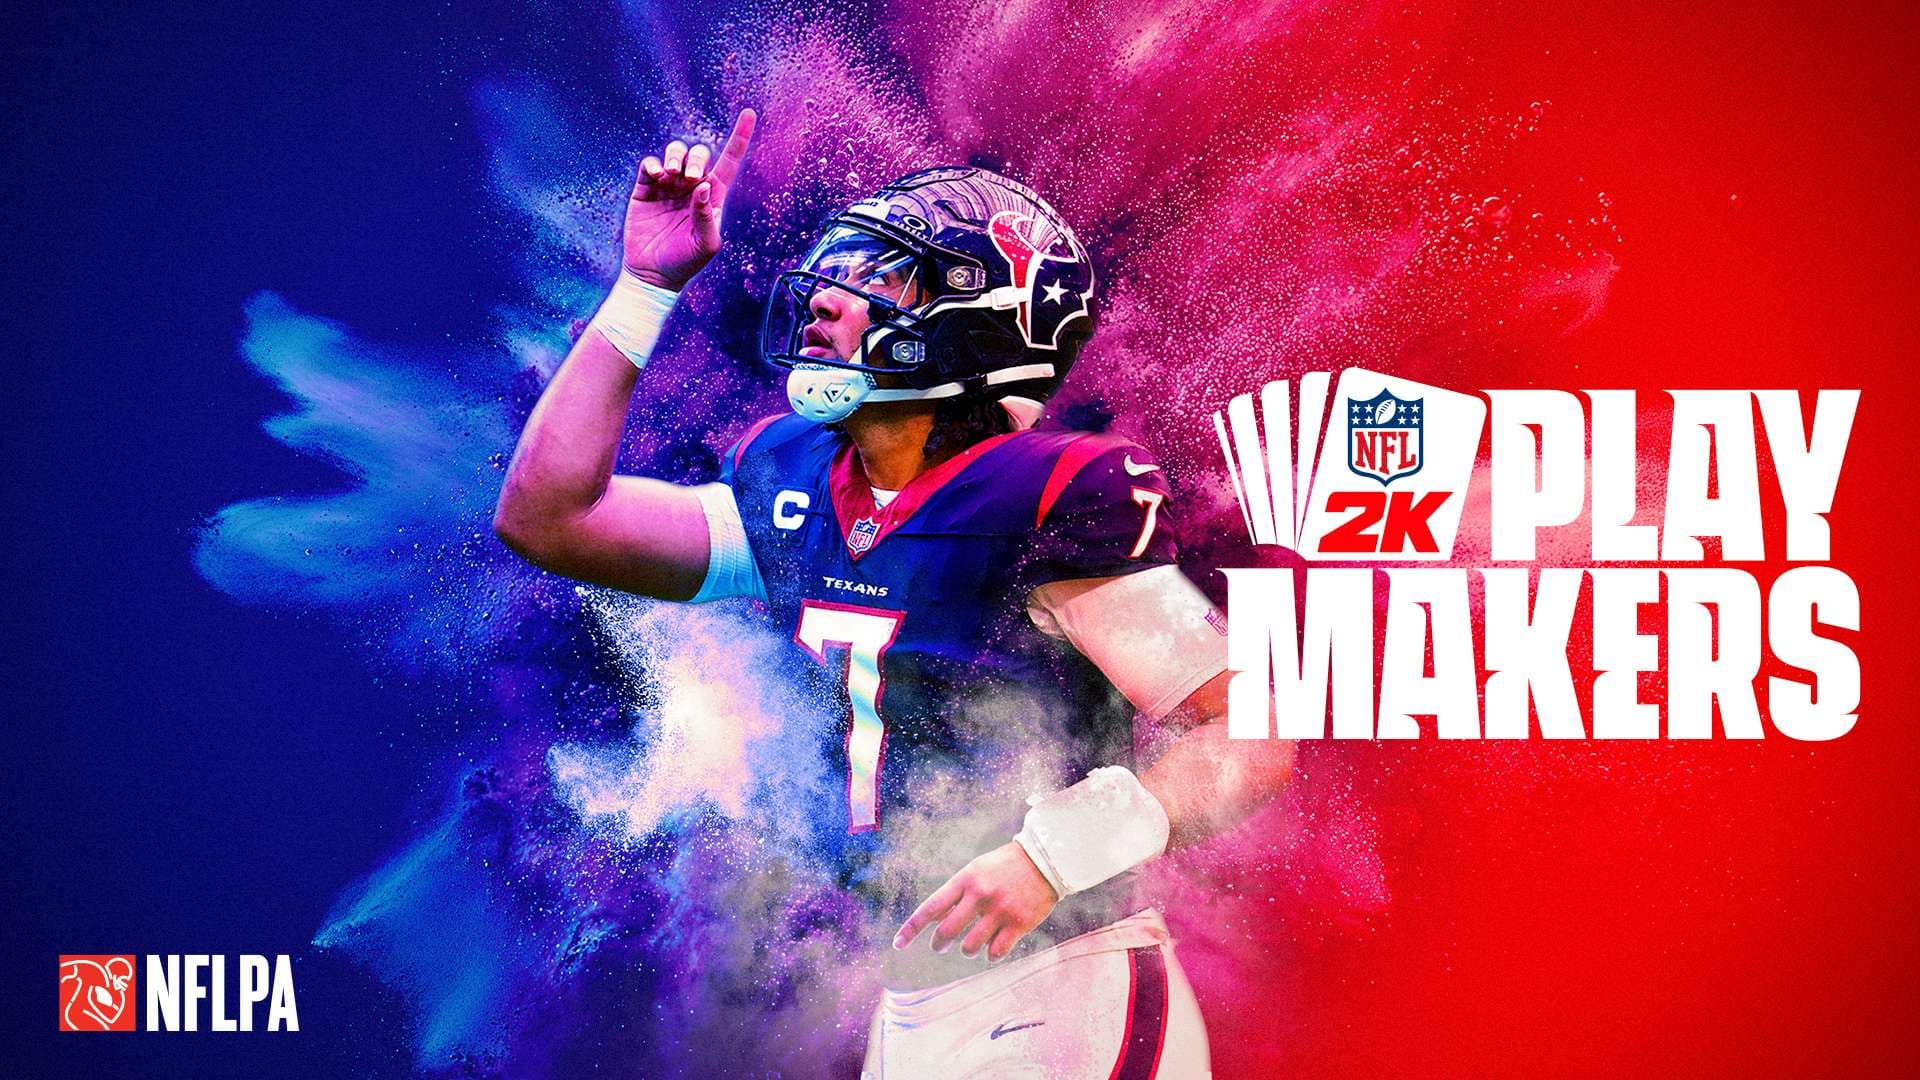 Read more about the article NFL, NFLPA AND 2K ANNOUNCE LAUNCH OF NFL 2K PLAYMAKERS MOBILE GAME